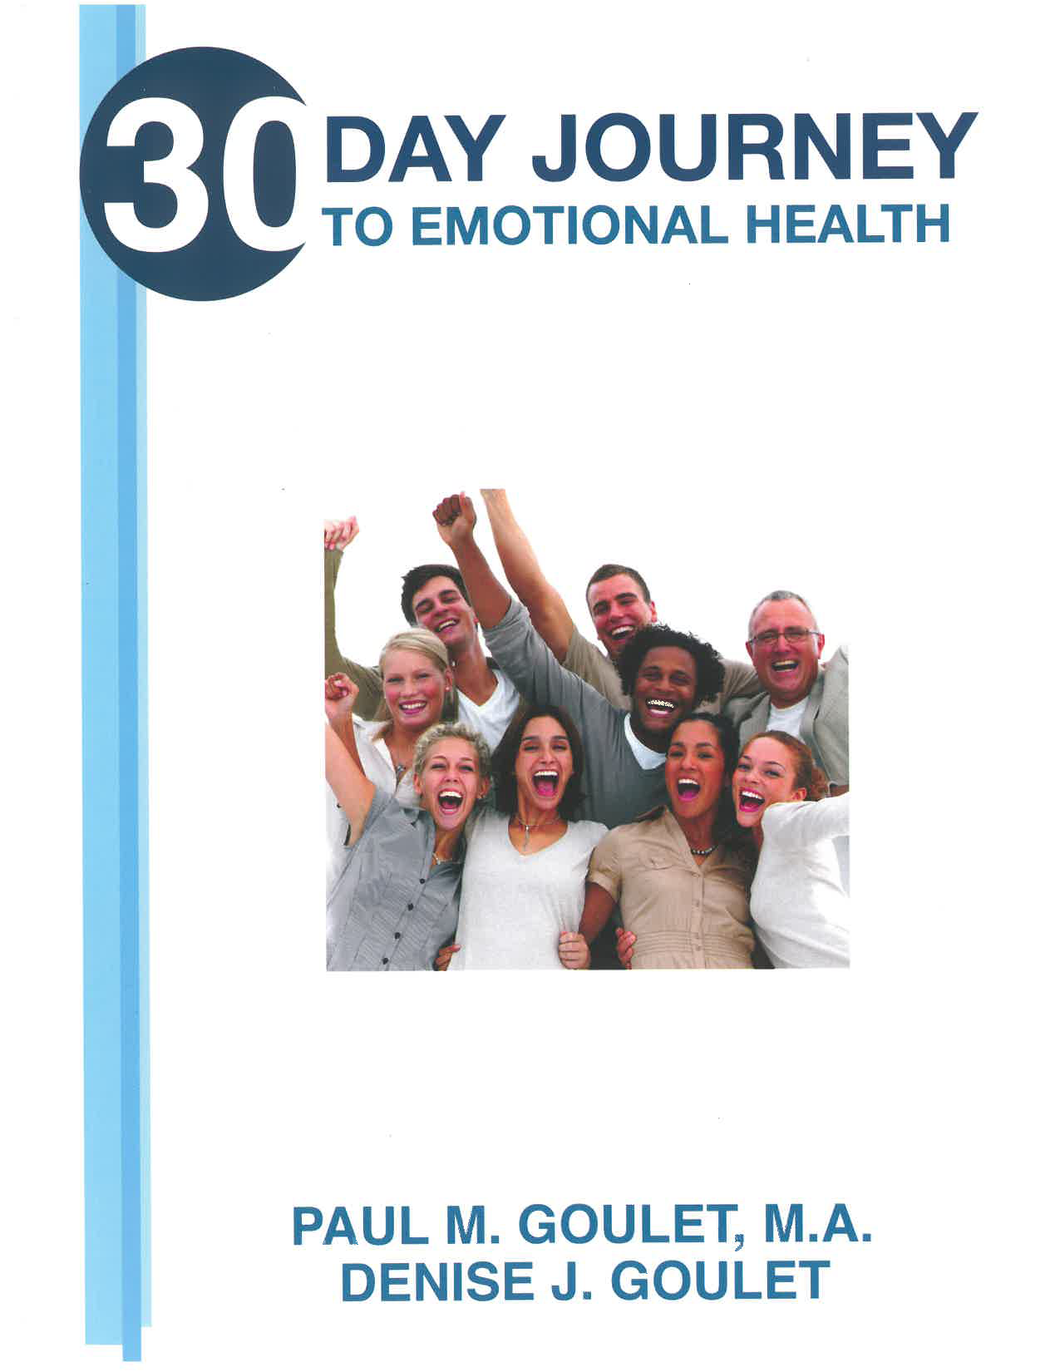 30 Day Journey to Emotional Health E-book